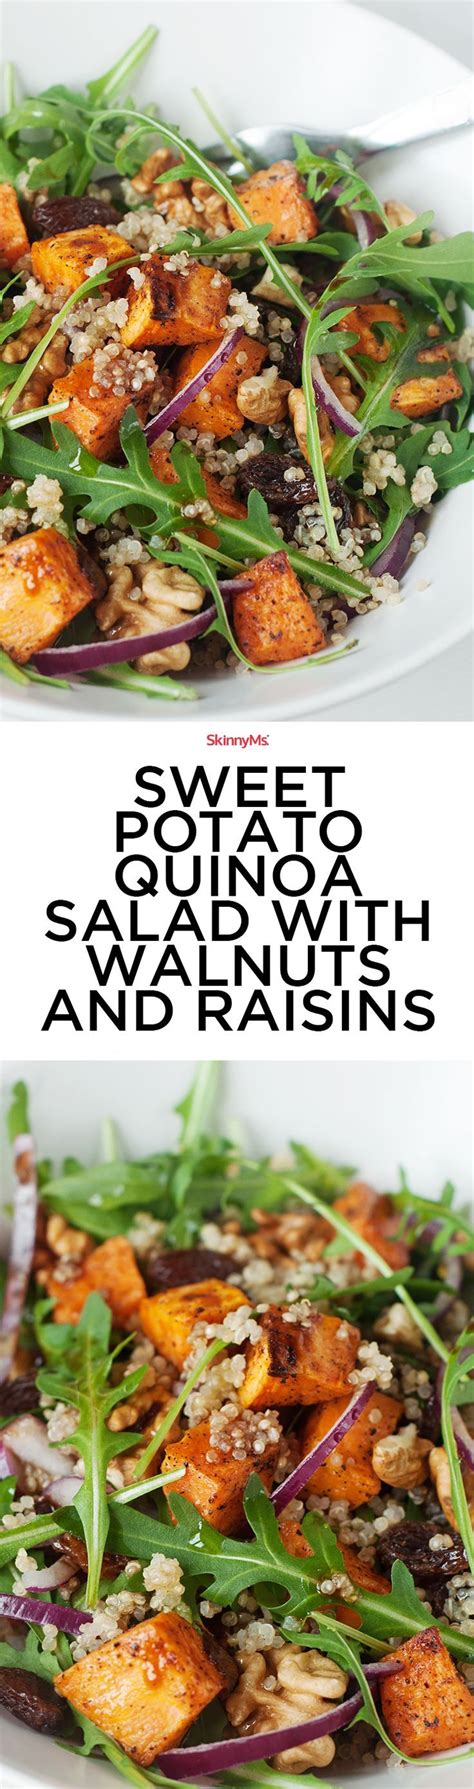 This delicious salad requires some prep work, but you can make a few batches at a time and enjoy it throughout the week. Sweet Potato Quinoa Salad with Walnuts and Raisins | Recipe | Vegetarian recipes, Healthy recipes